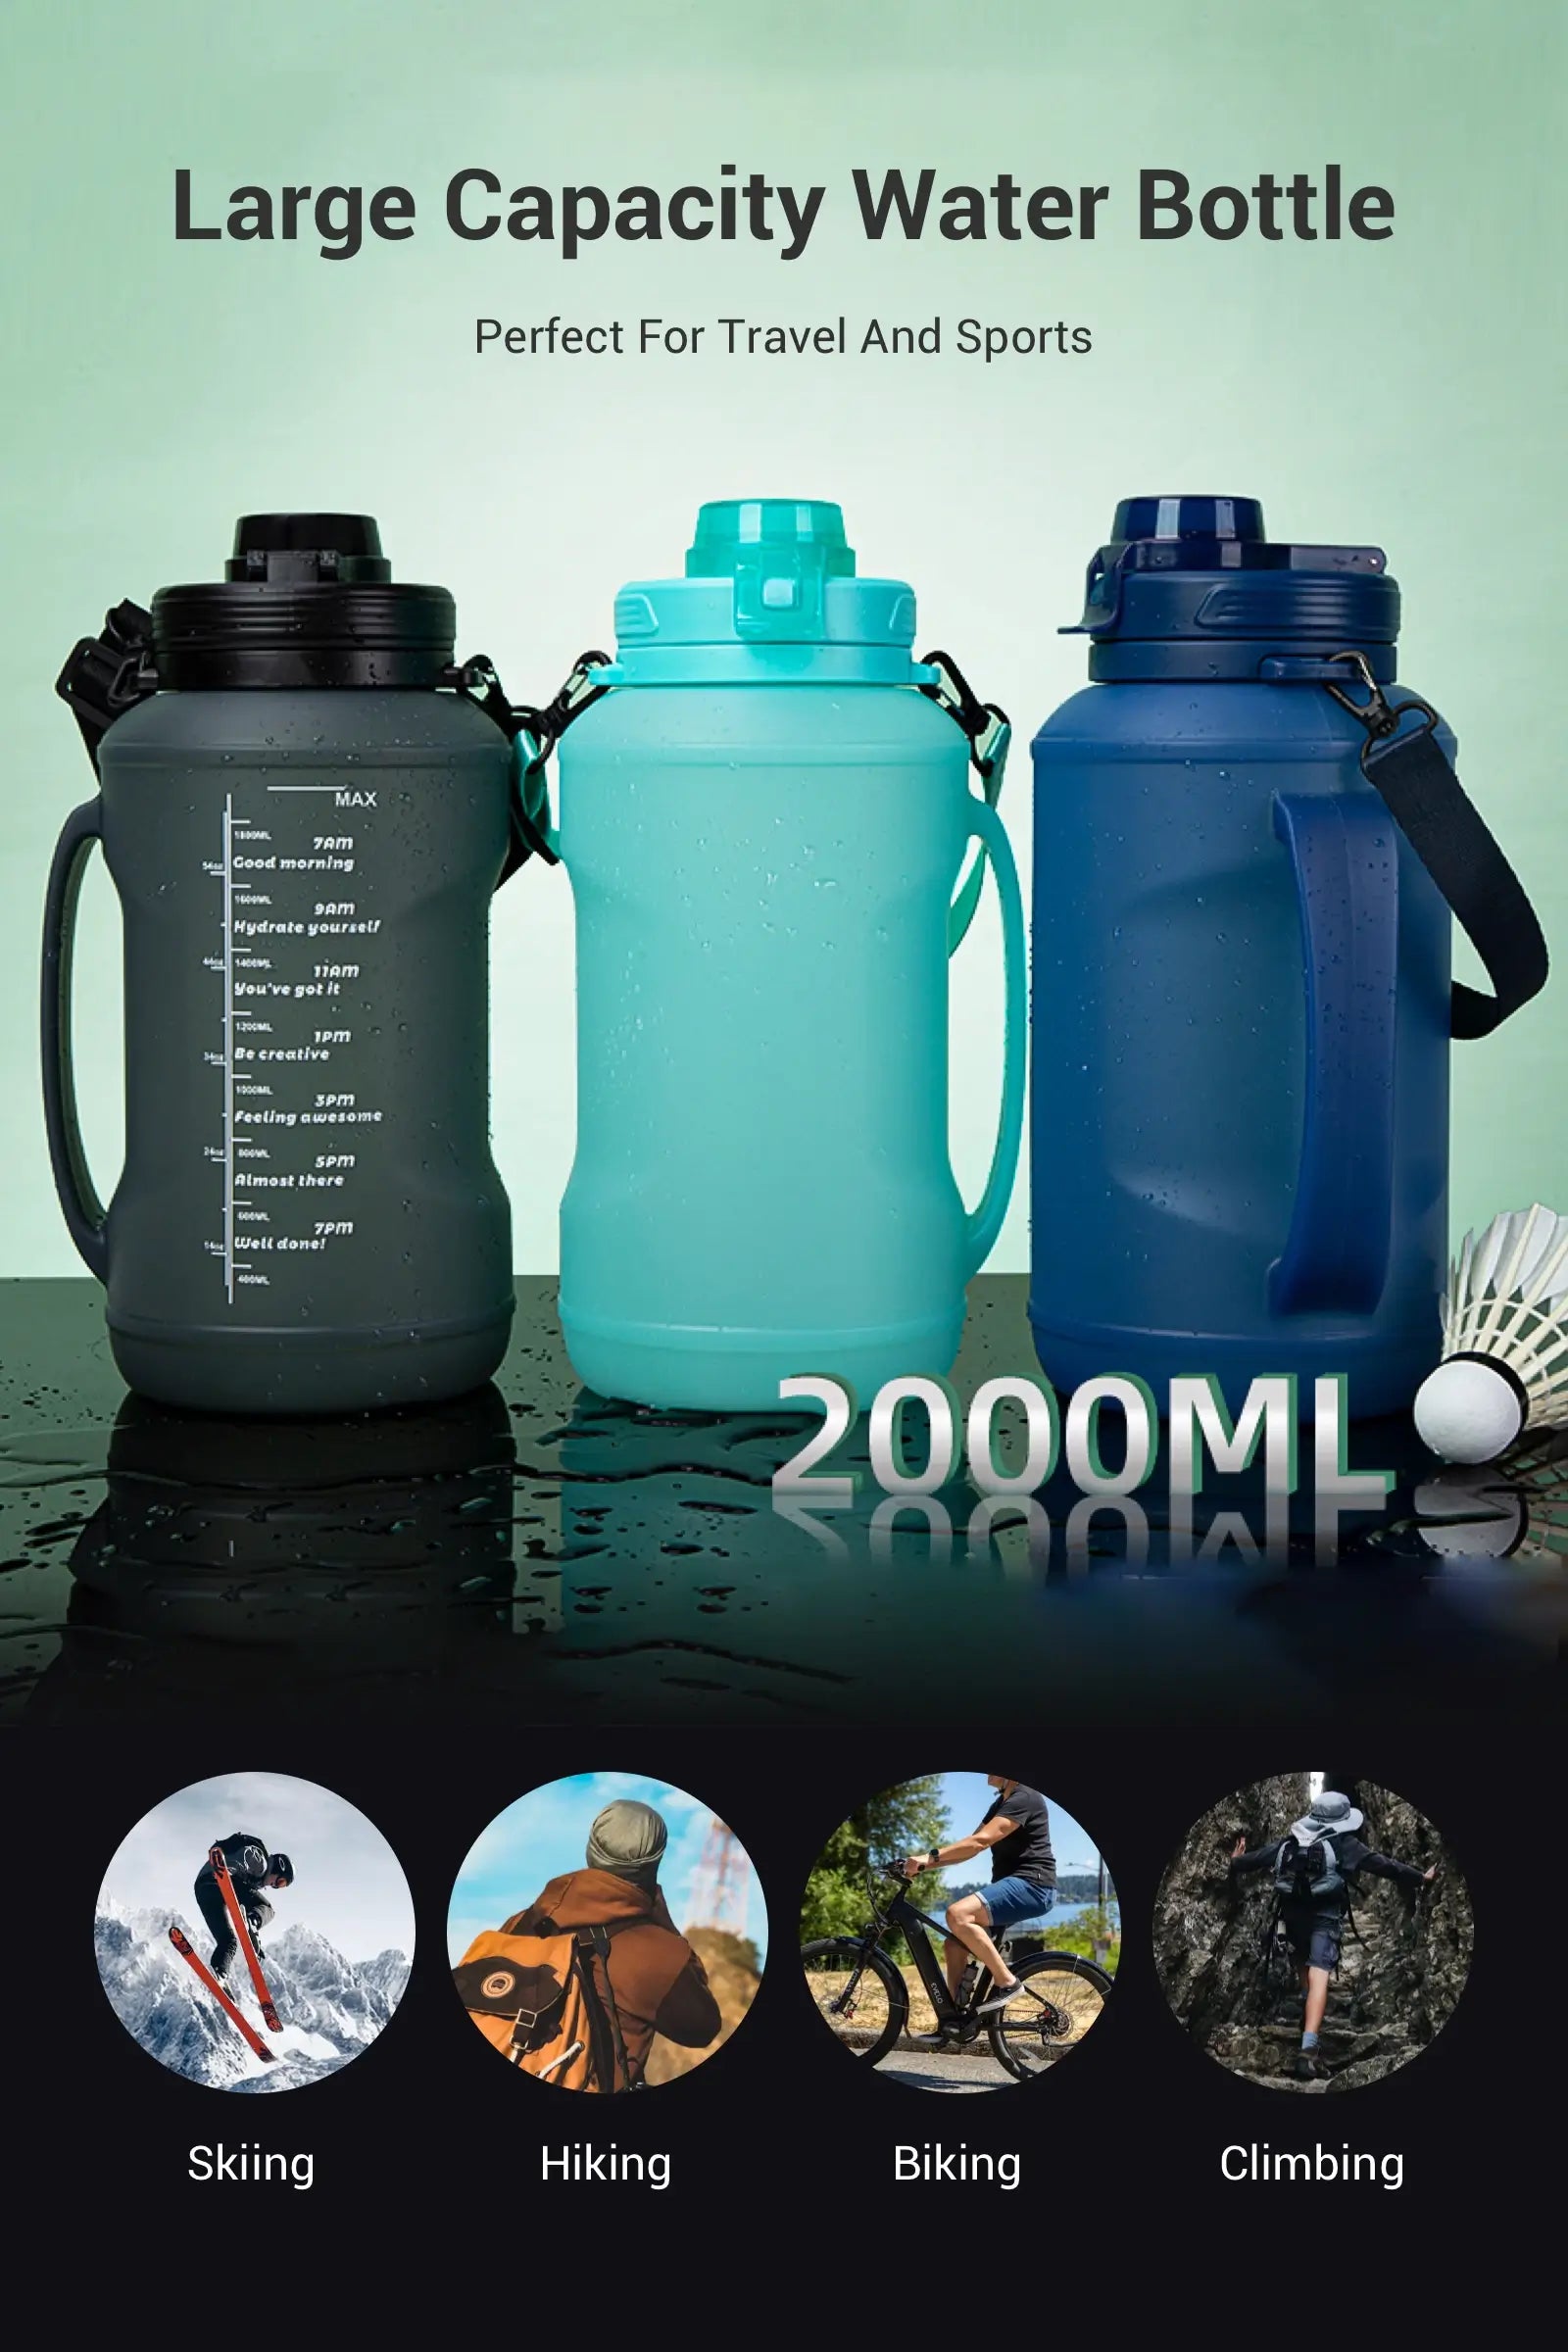 Large Capacity Water Bottle Perfect For Travel And Sports  Skiing, Hiking, Biking, Climbing